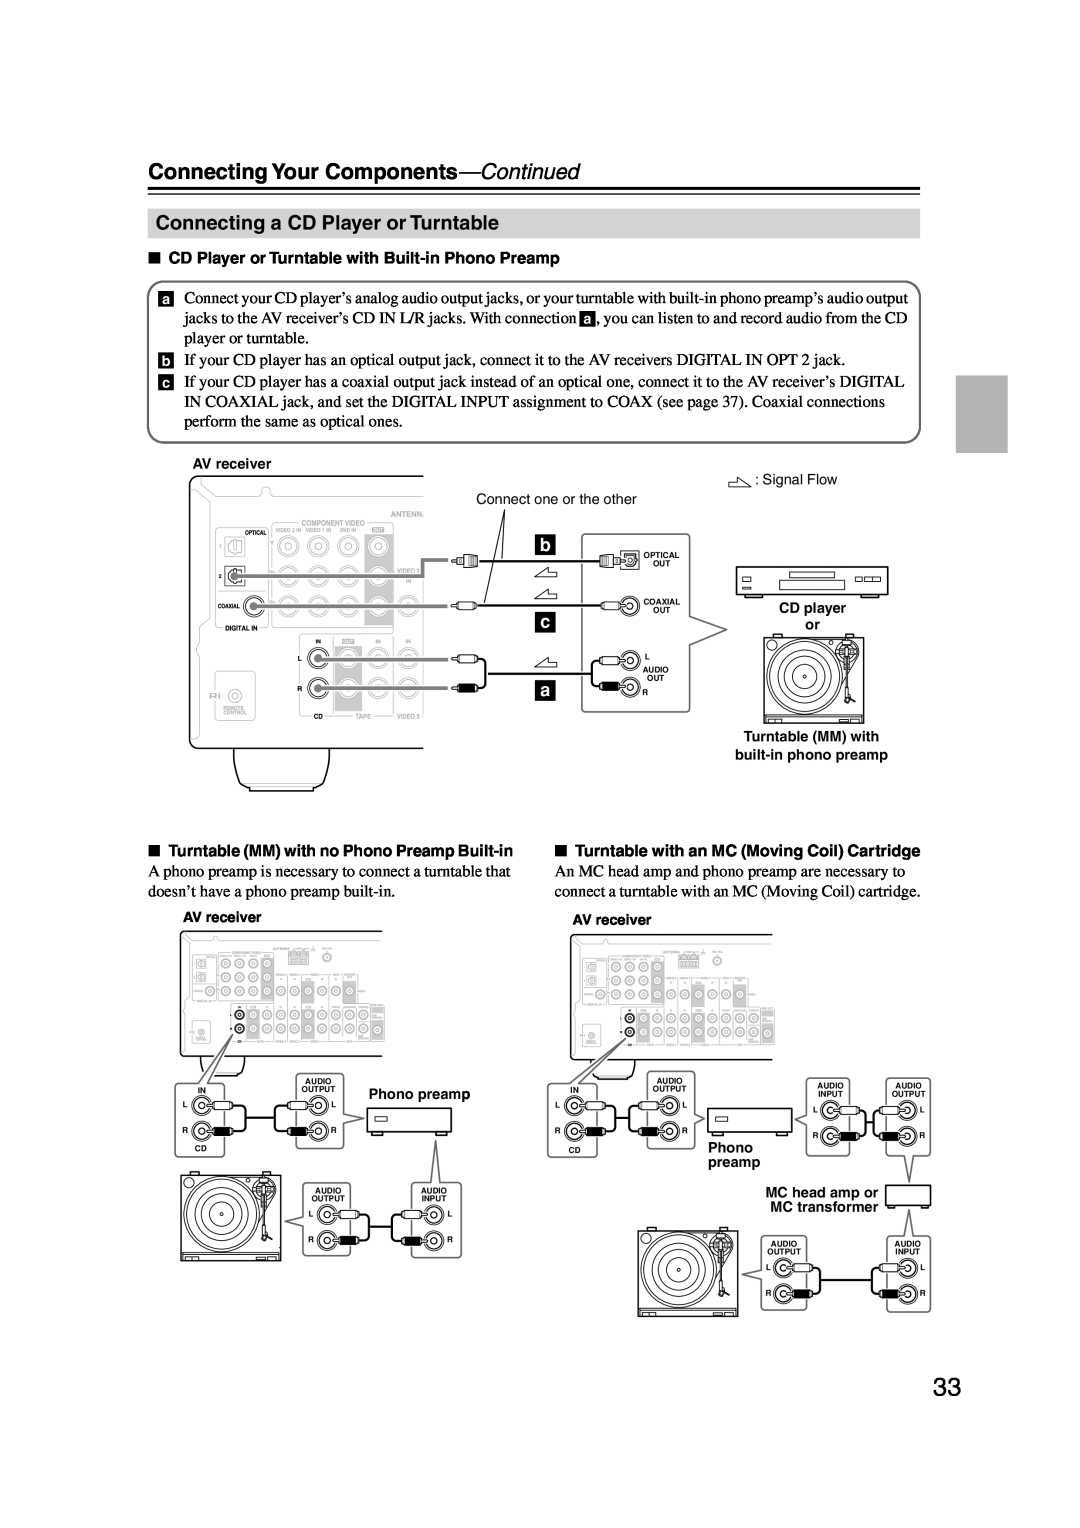 Onkyo HT-S4100 instruction manual Connecting Your Components-Continued, Connecting a CD Player or Turntable 